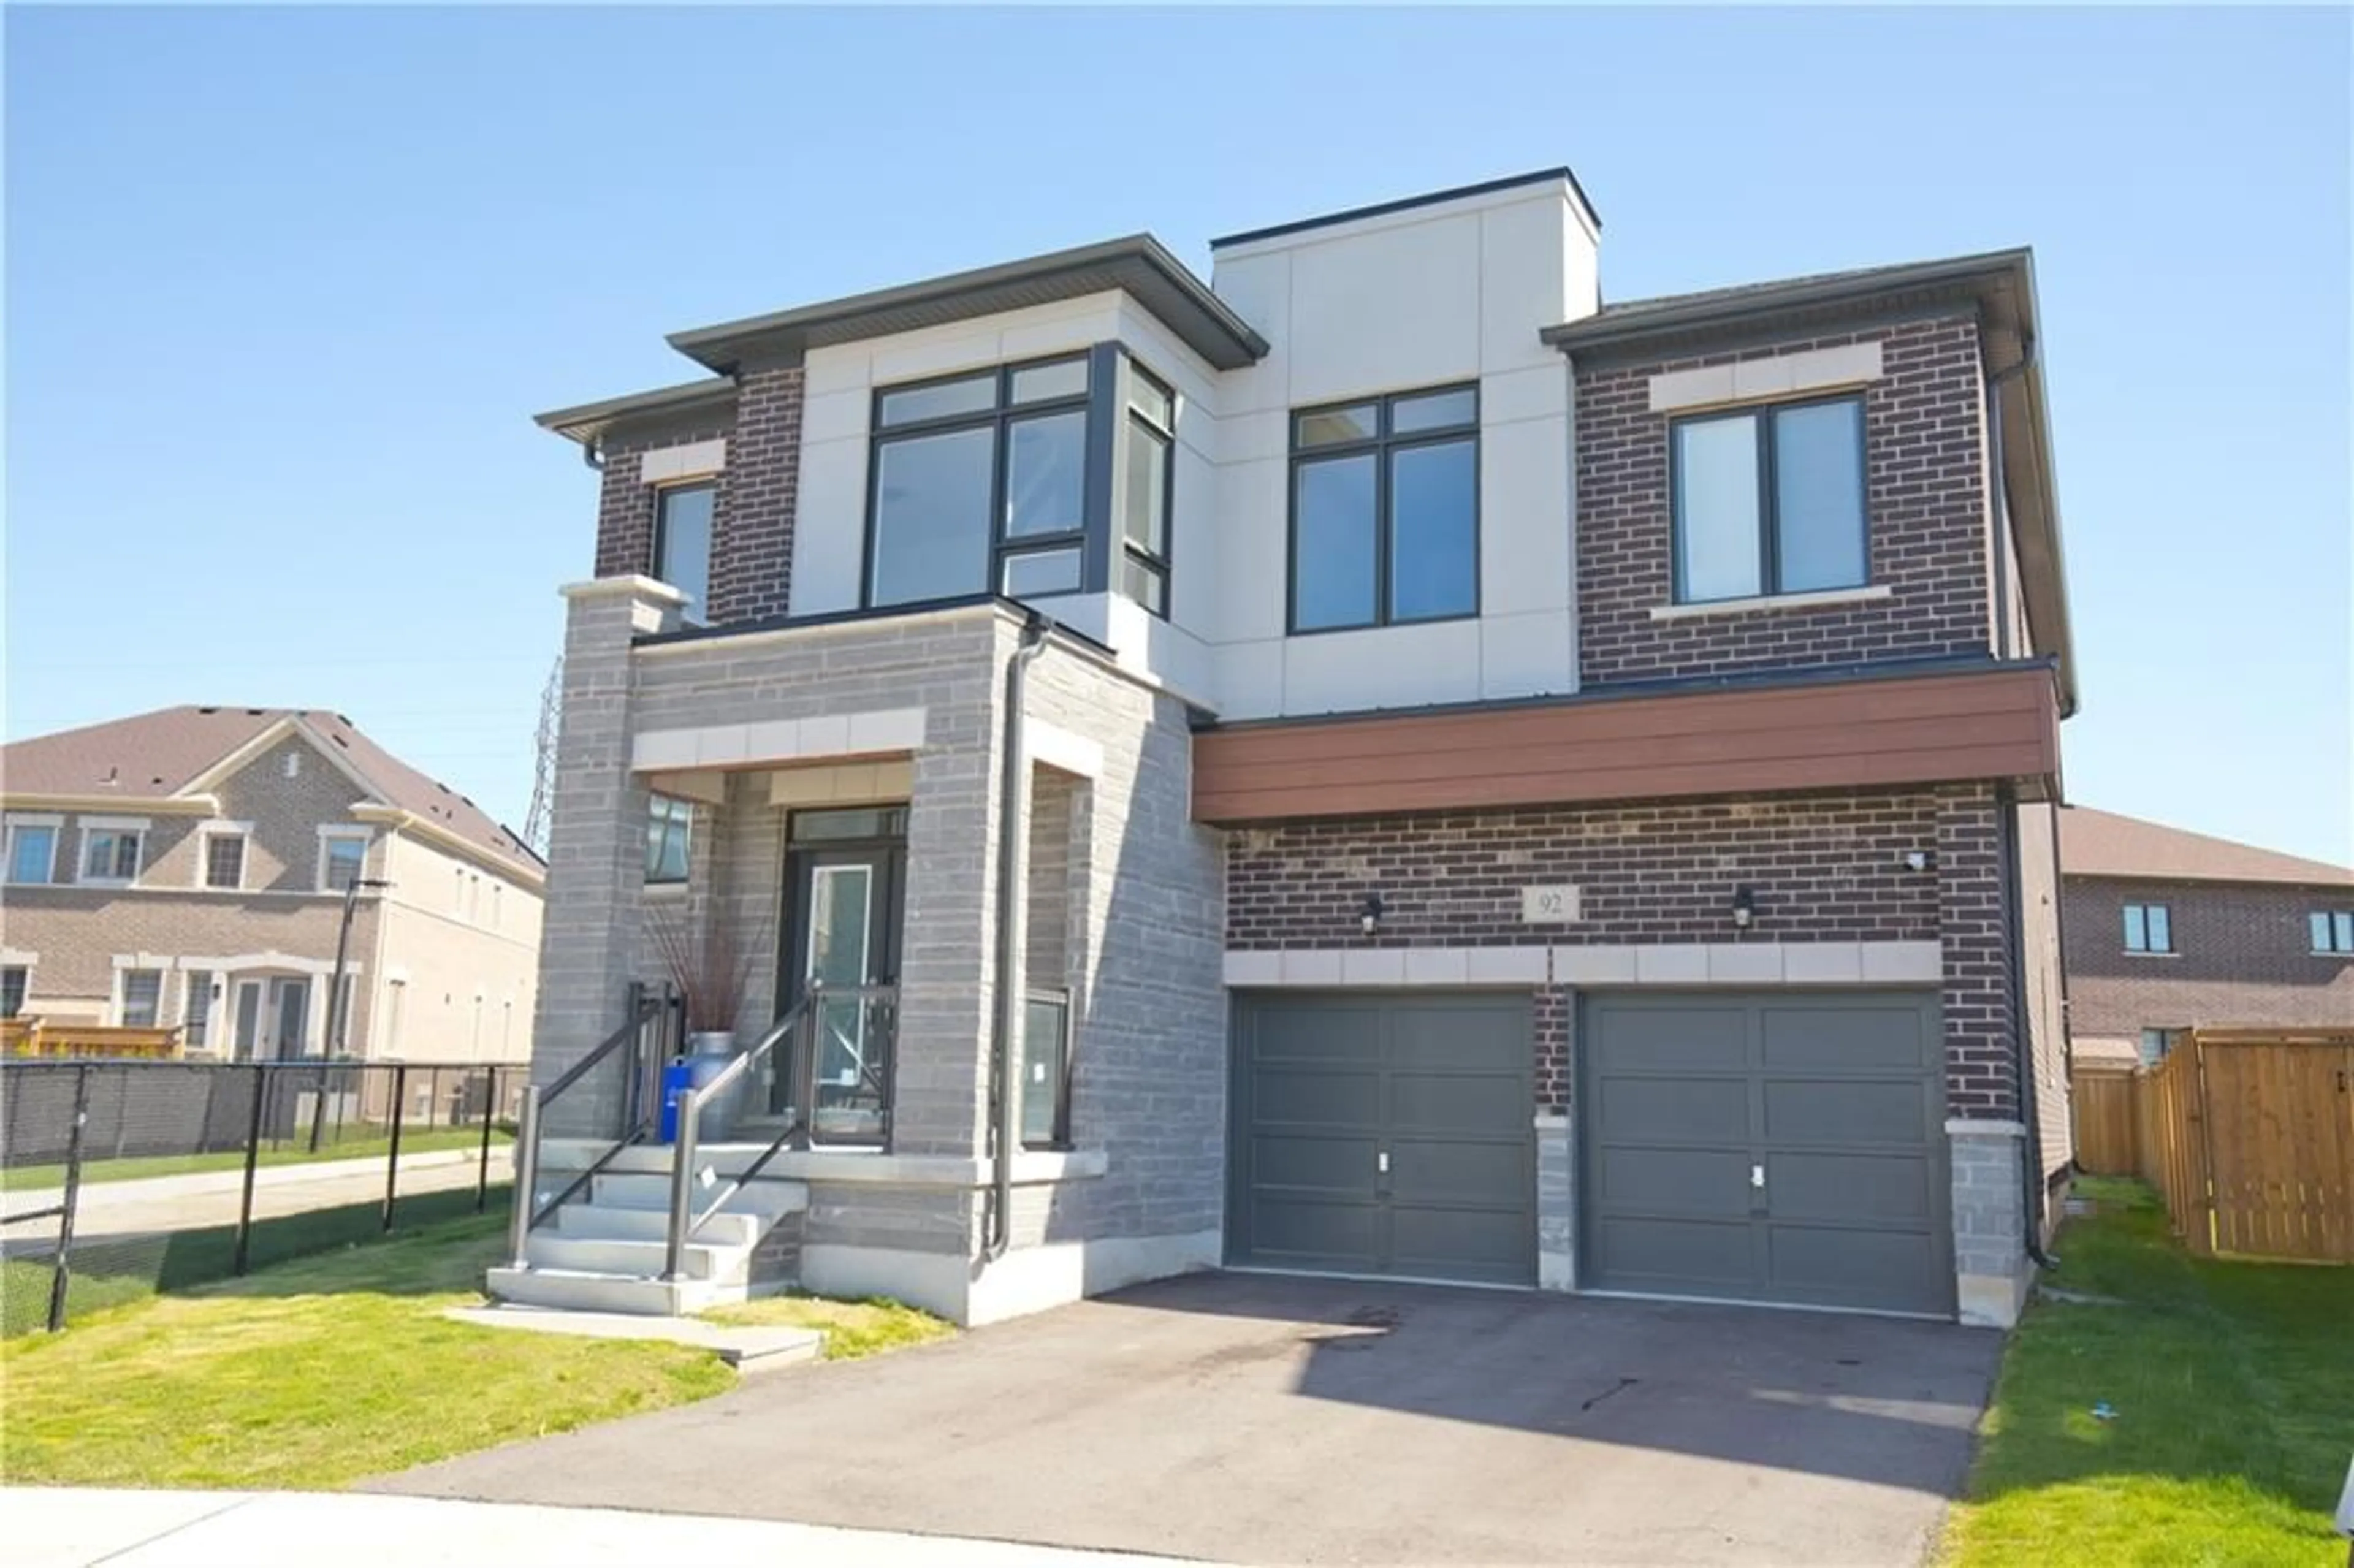 Home with brick exterior material for 92 ELSTONE Place, Waterdown Ontario L8B 1Y9